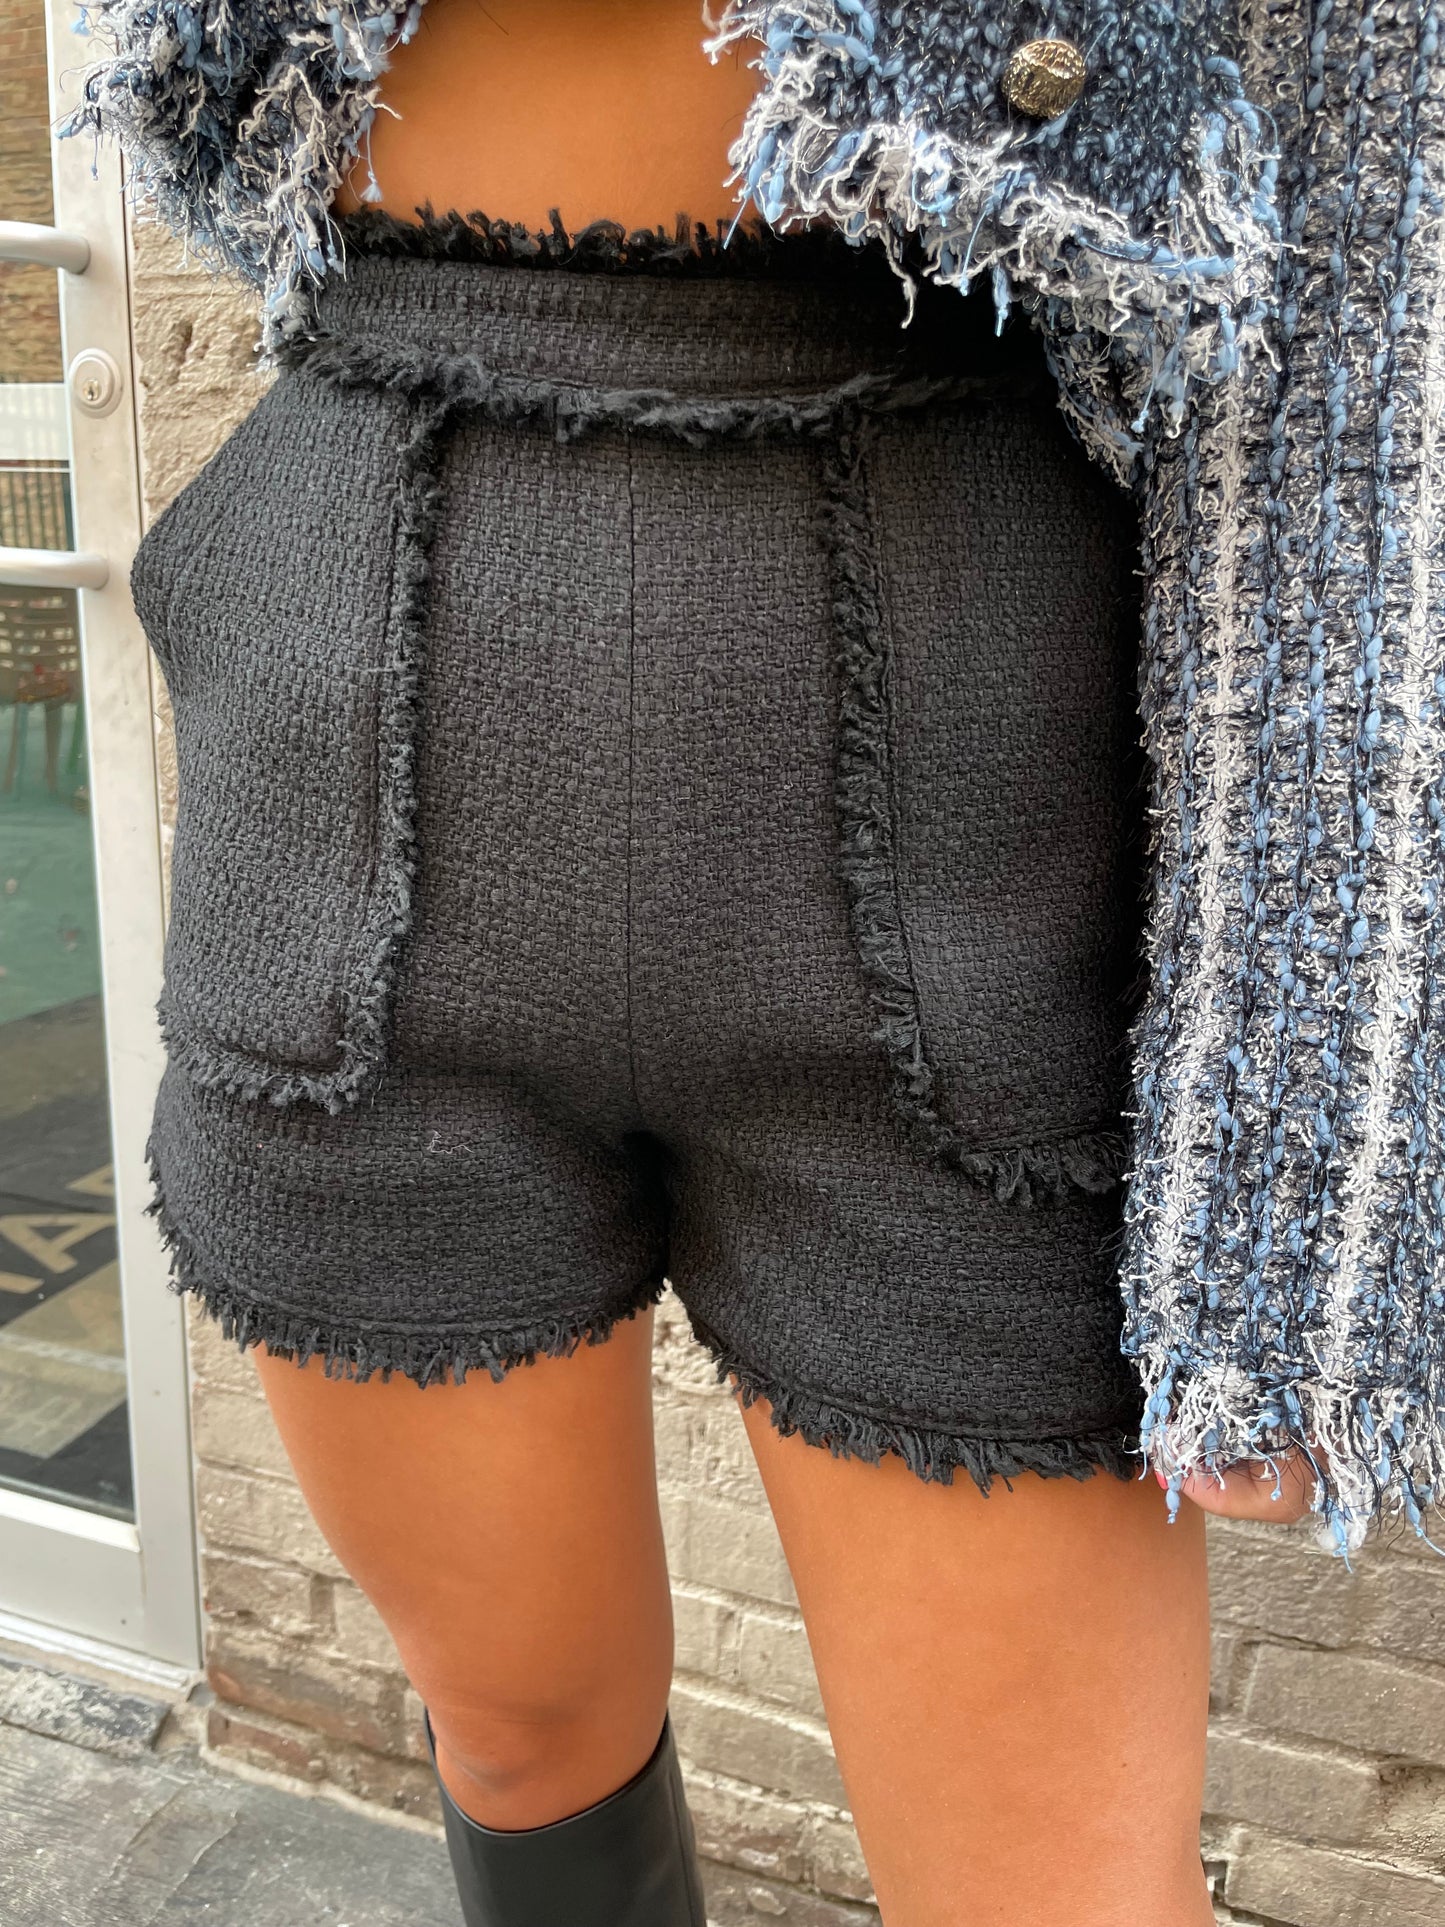 CLASSY BLACK TWEED SHORTS - THE HIP EAGLE BOUTIQUE